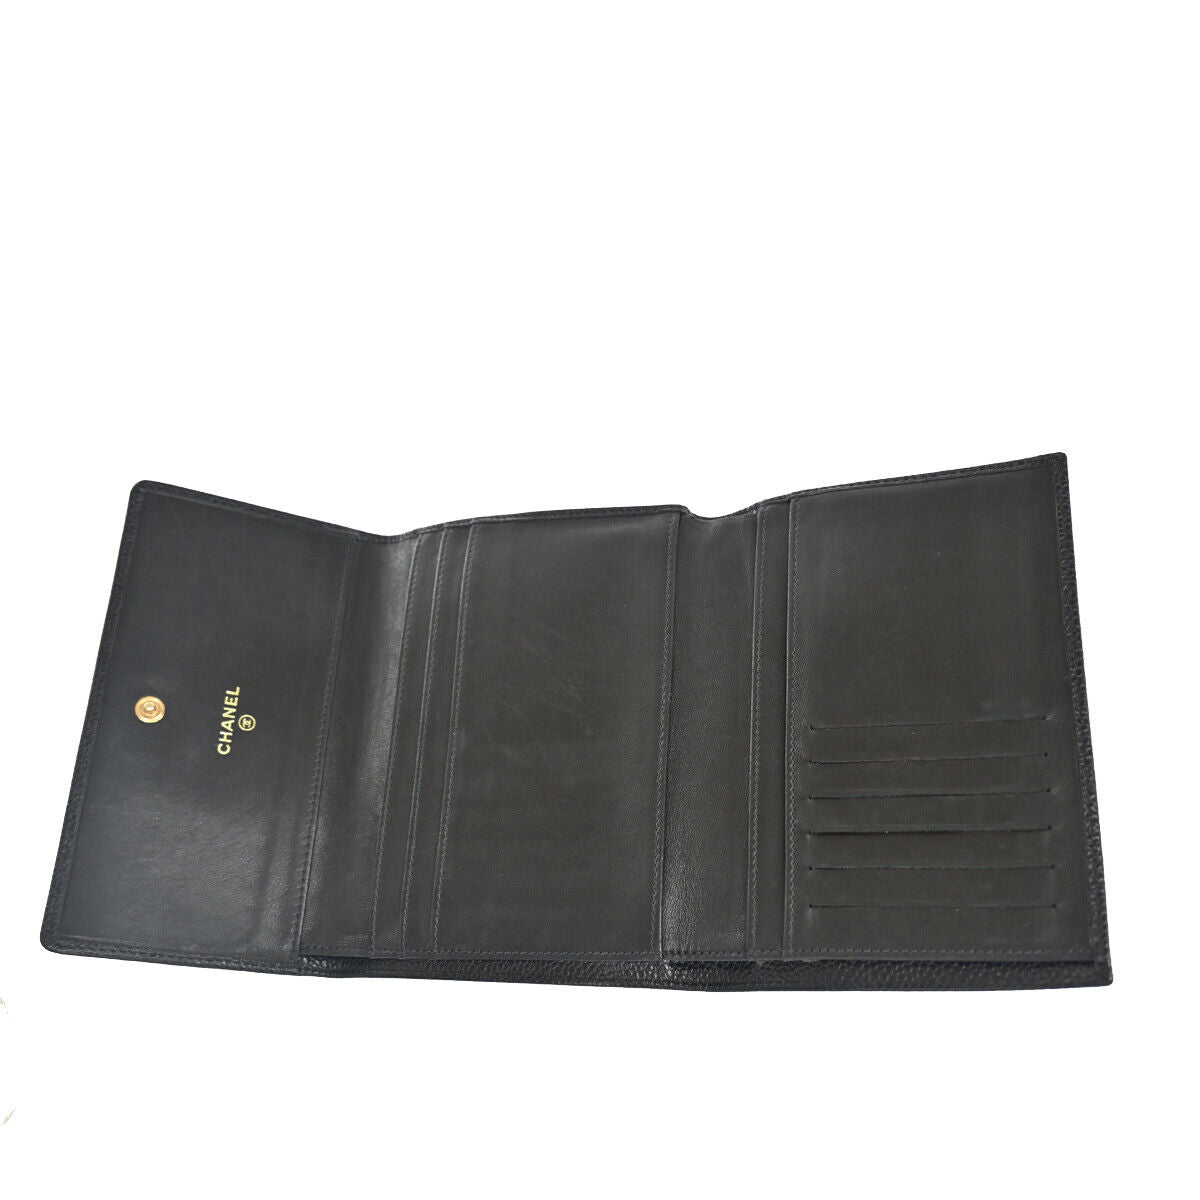 Pre-owned Chanel Logo Cc Black Pony-style Calfskin Wallet  ()